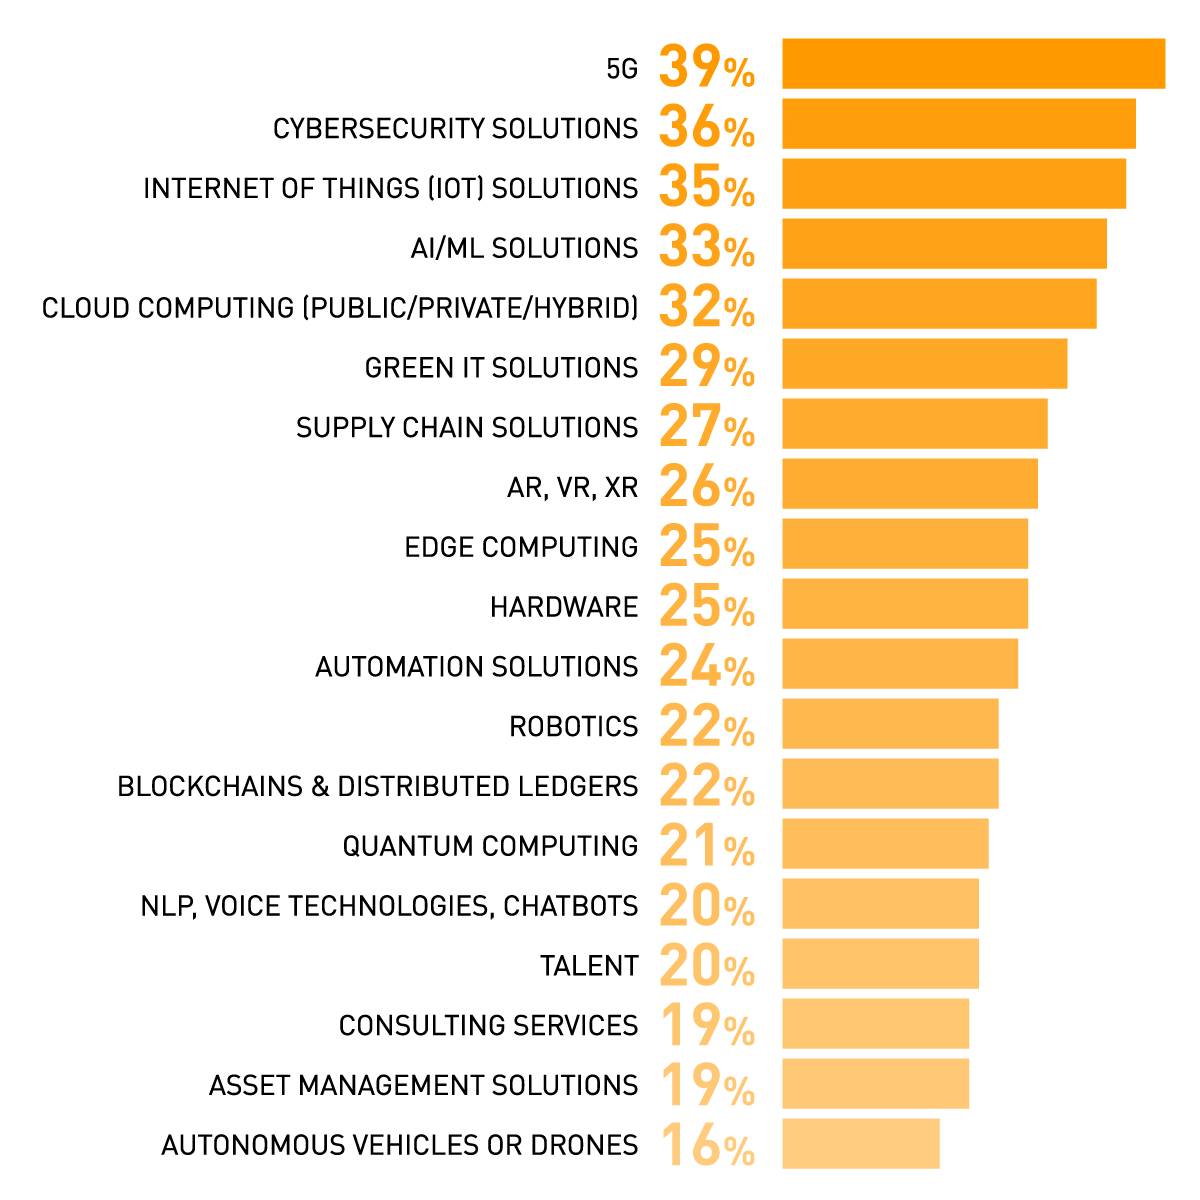 Percentage of companies that plan to invest in these types of technologies in the next two years